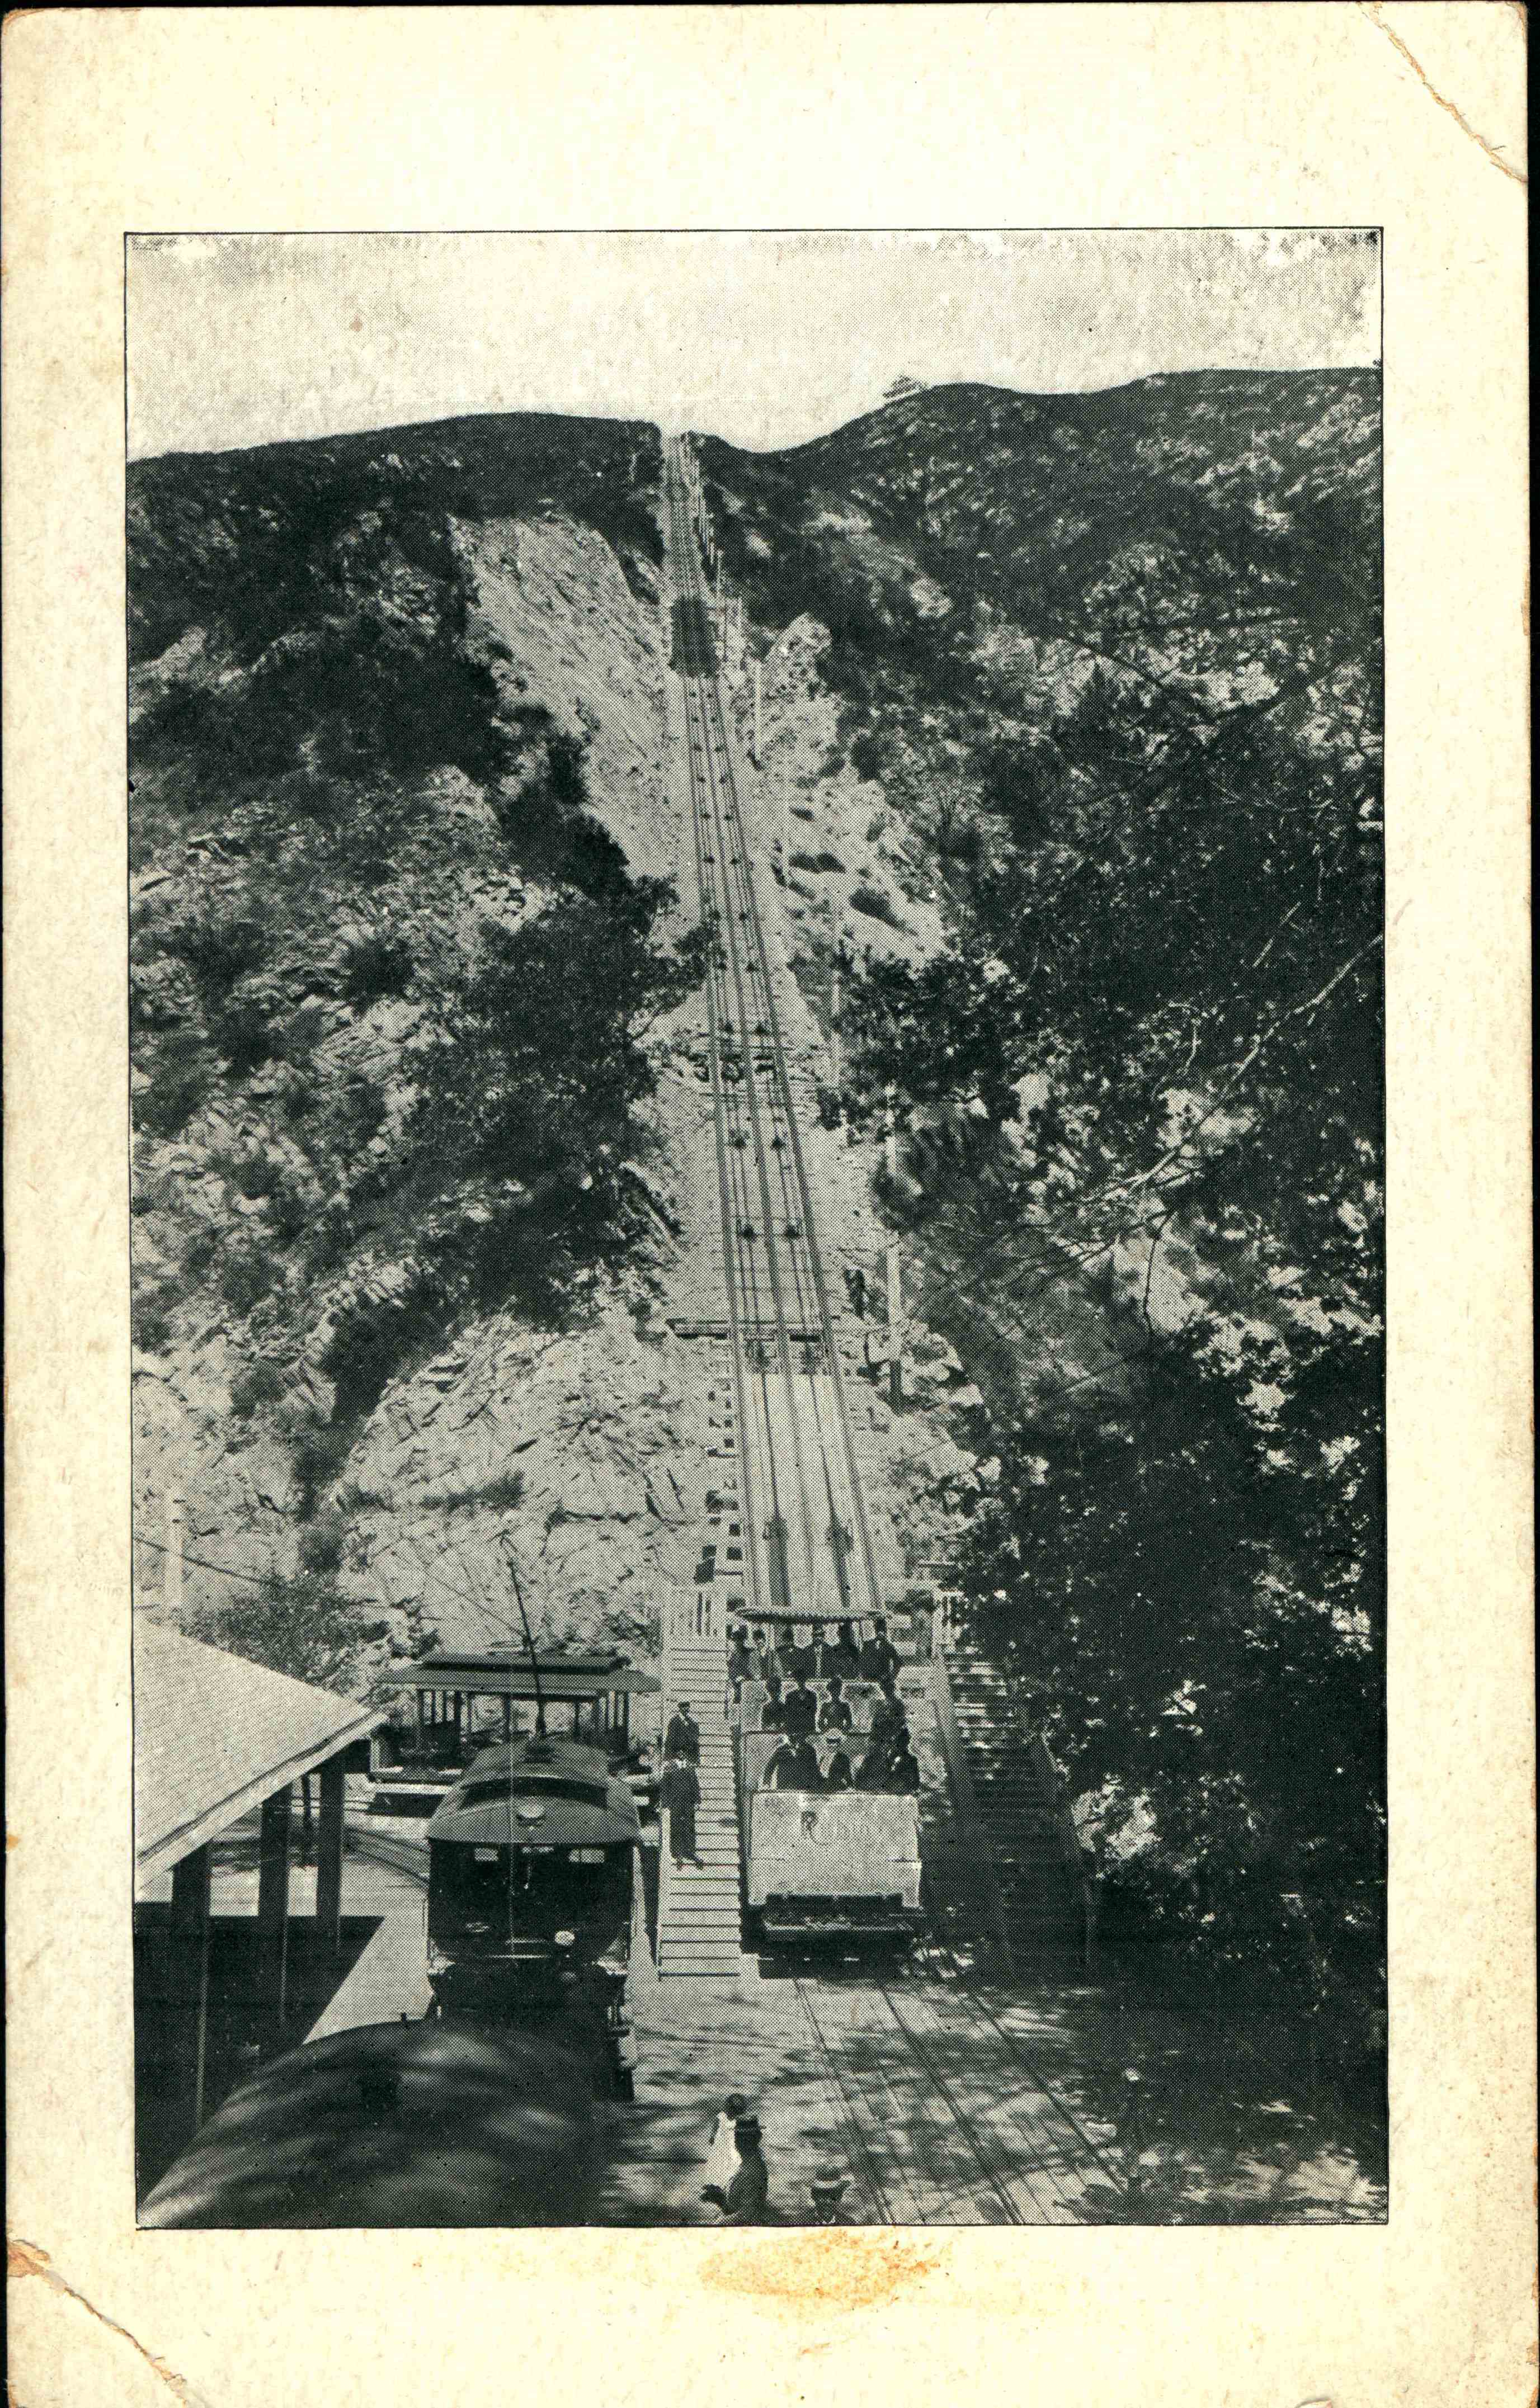 A trolley come down the mountain